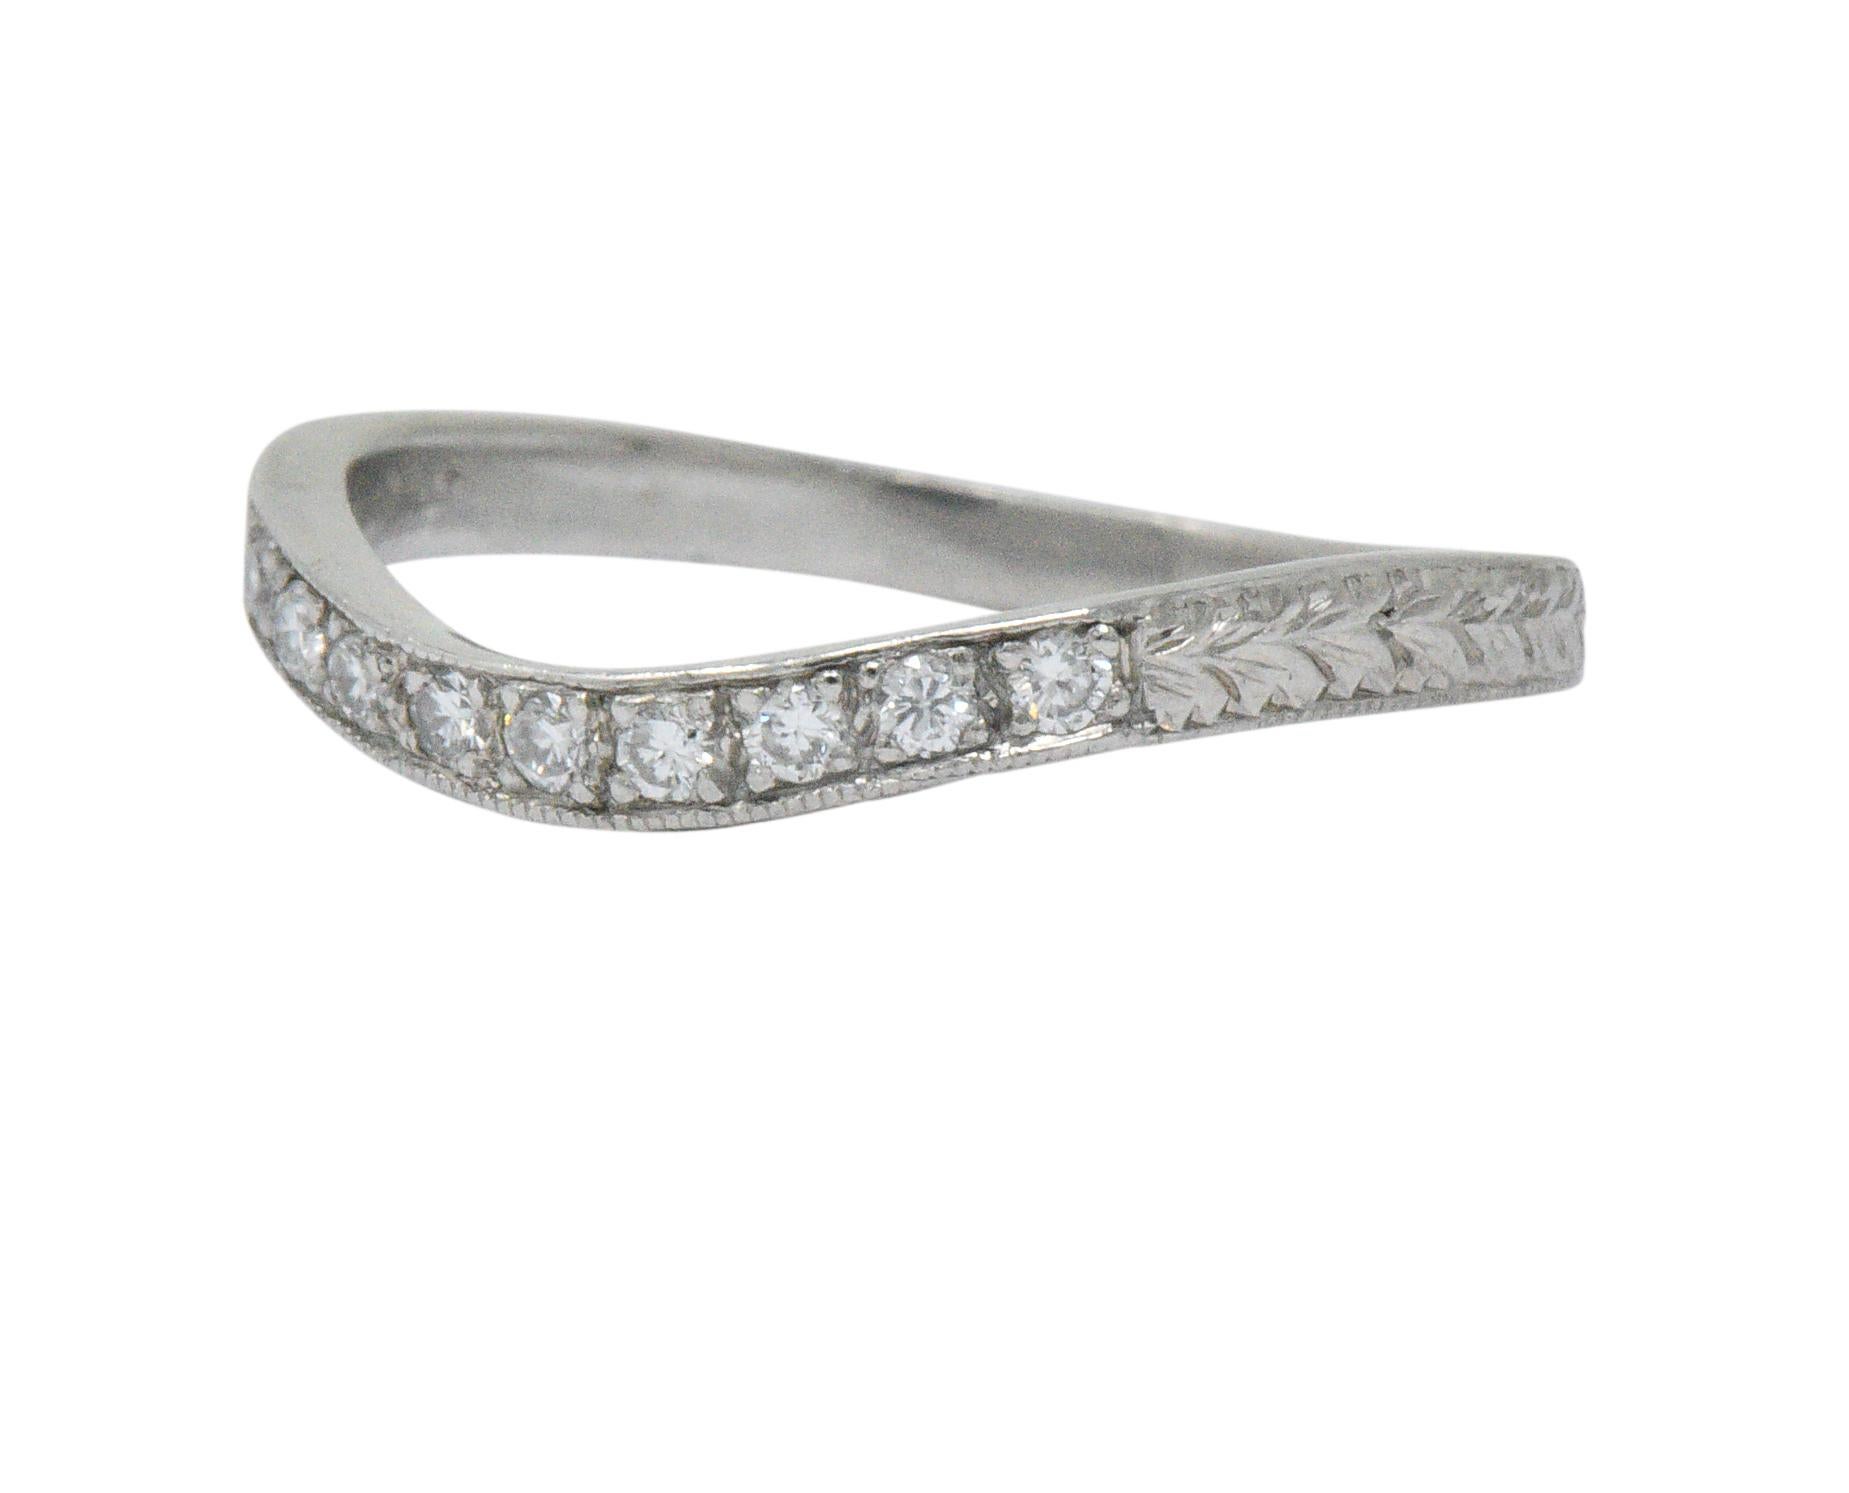 Contoured design and set to the front with full cut diamonds

Total diamond weight approximately 0.15 carat, eye clean and white

Engraved platinum shoulders and sides

Stamped RL 

CTW: 0.15

Ring Size: 5 1/2 & Sizable

Top measures 2.2 mm and sits